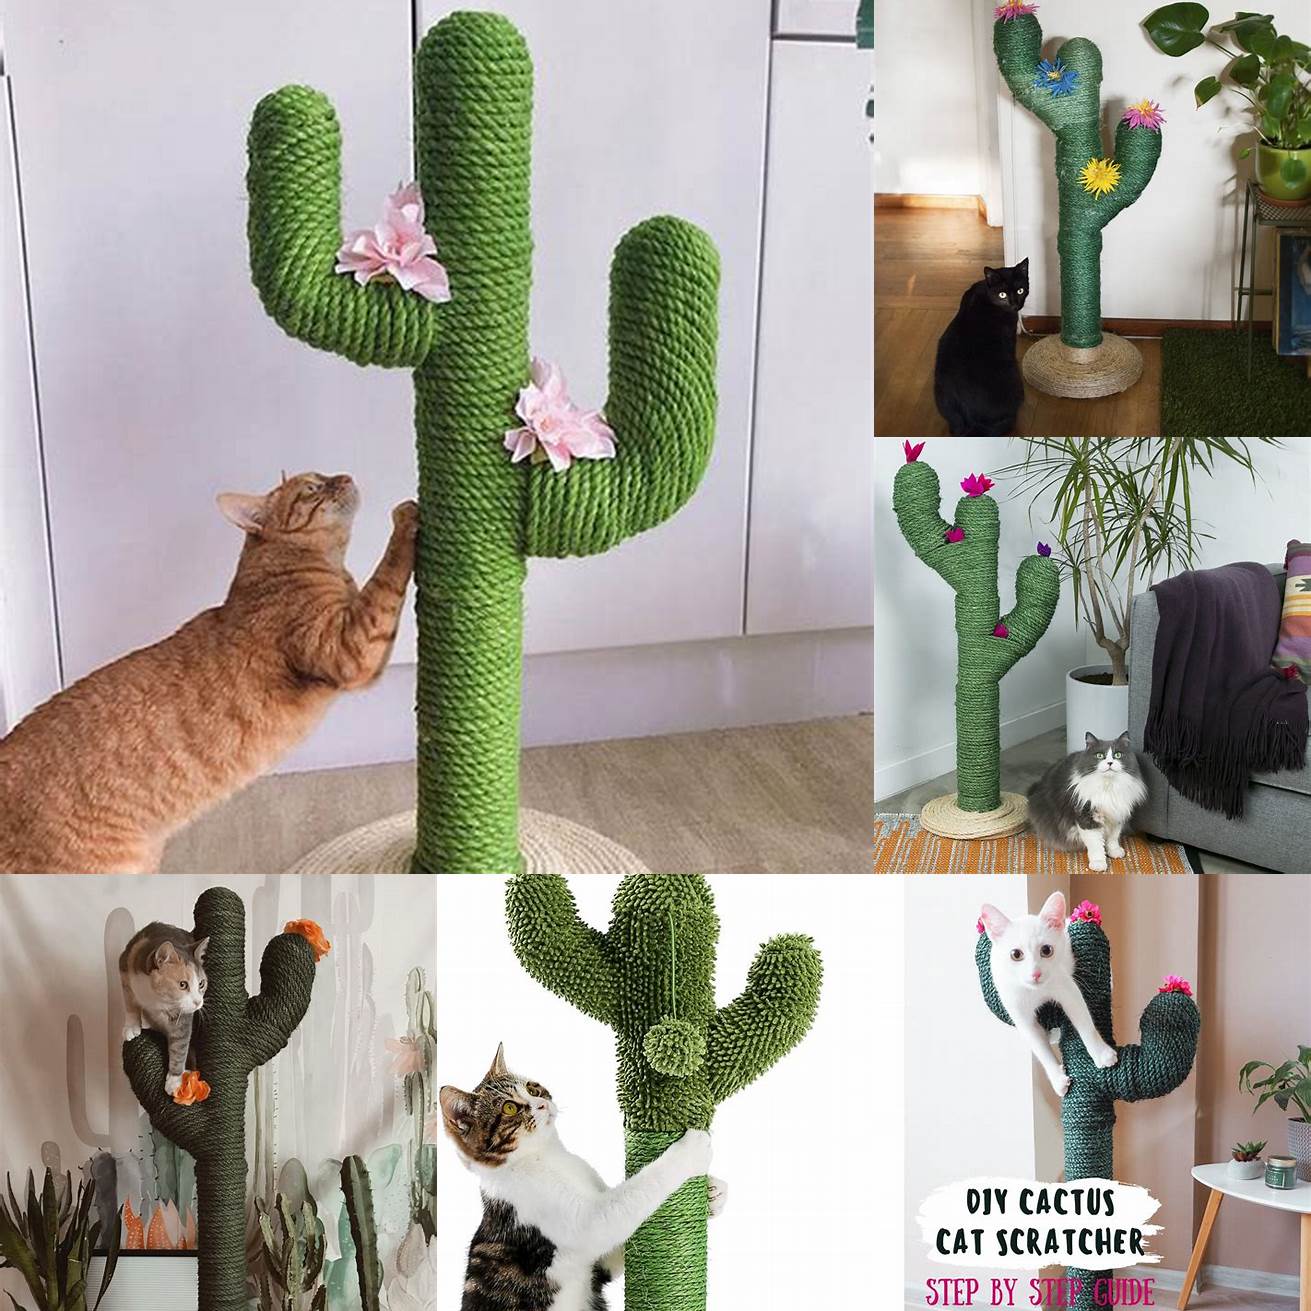 Get creative with DIY modifications to make the Cactus Cat Scratching Post even more personalized